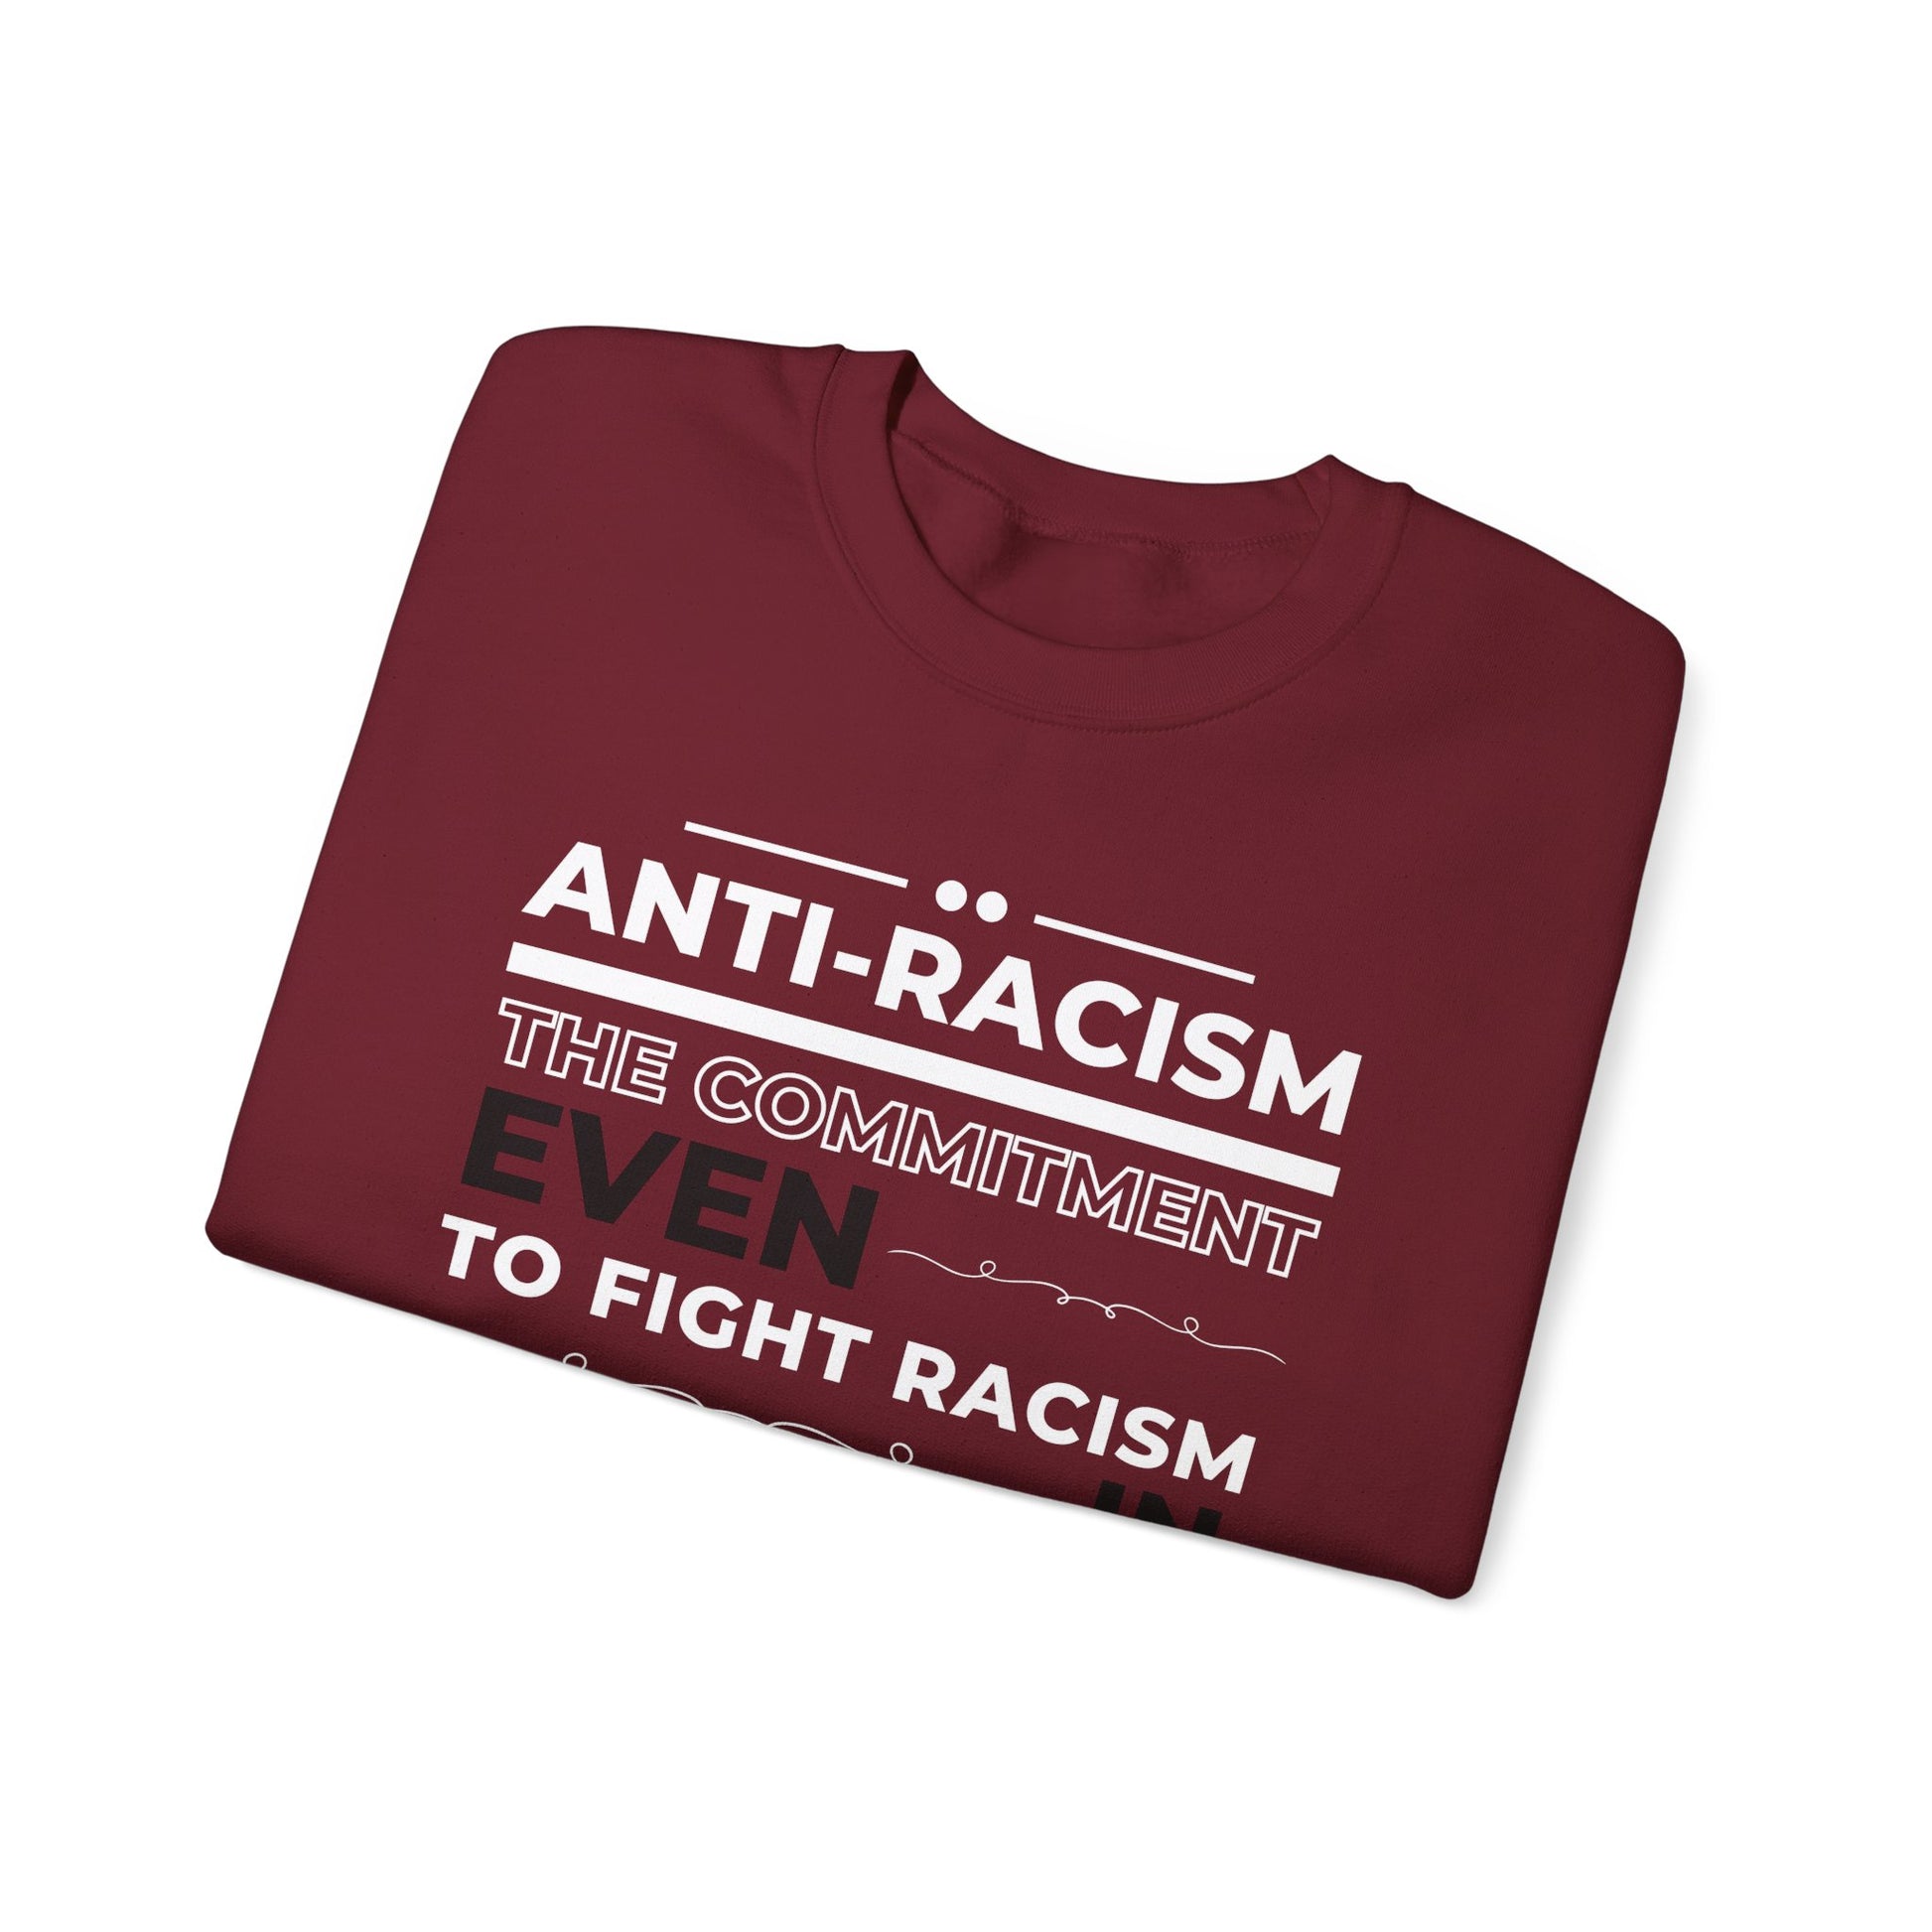 Garnet Gildan 18000 Sweatshirt with a strong anti-racism message: The commitment to fight racism wherever we find it, even in ourselves.